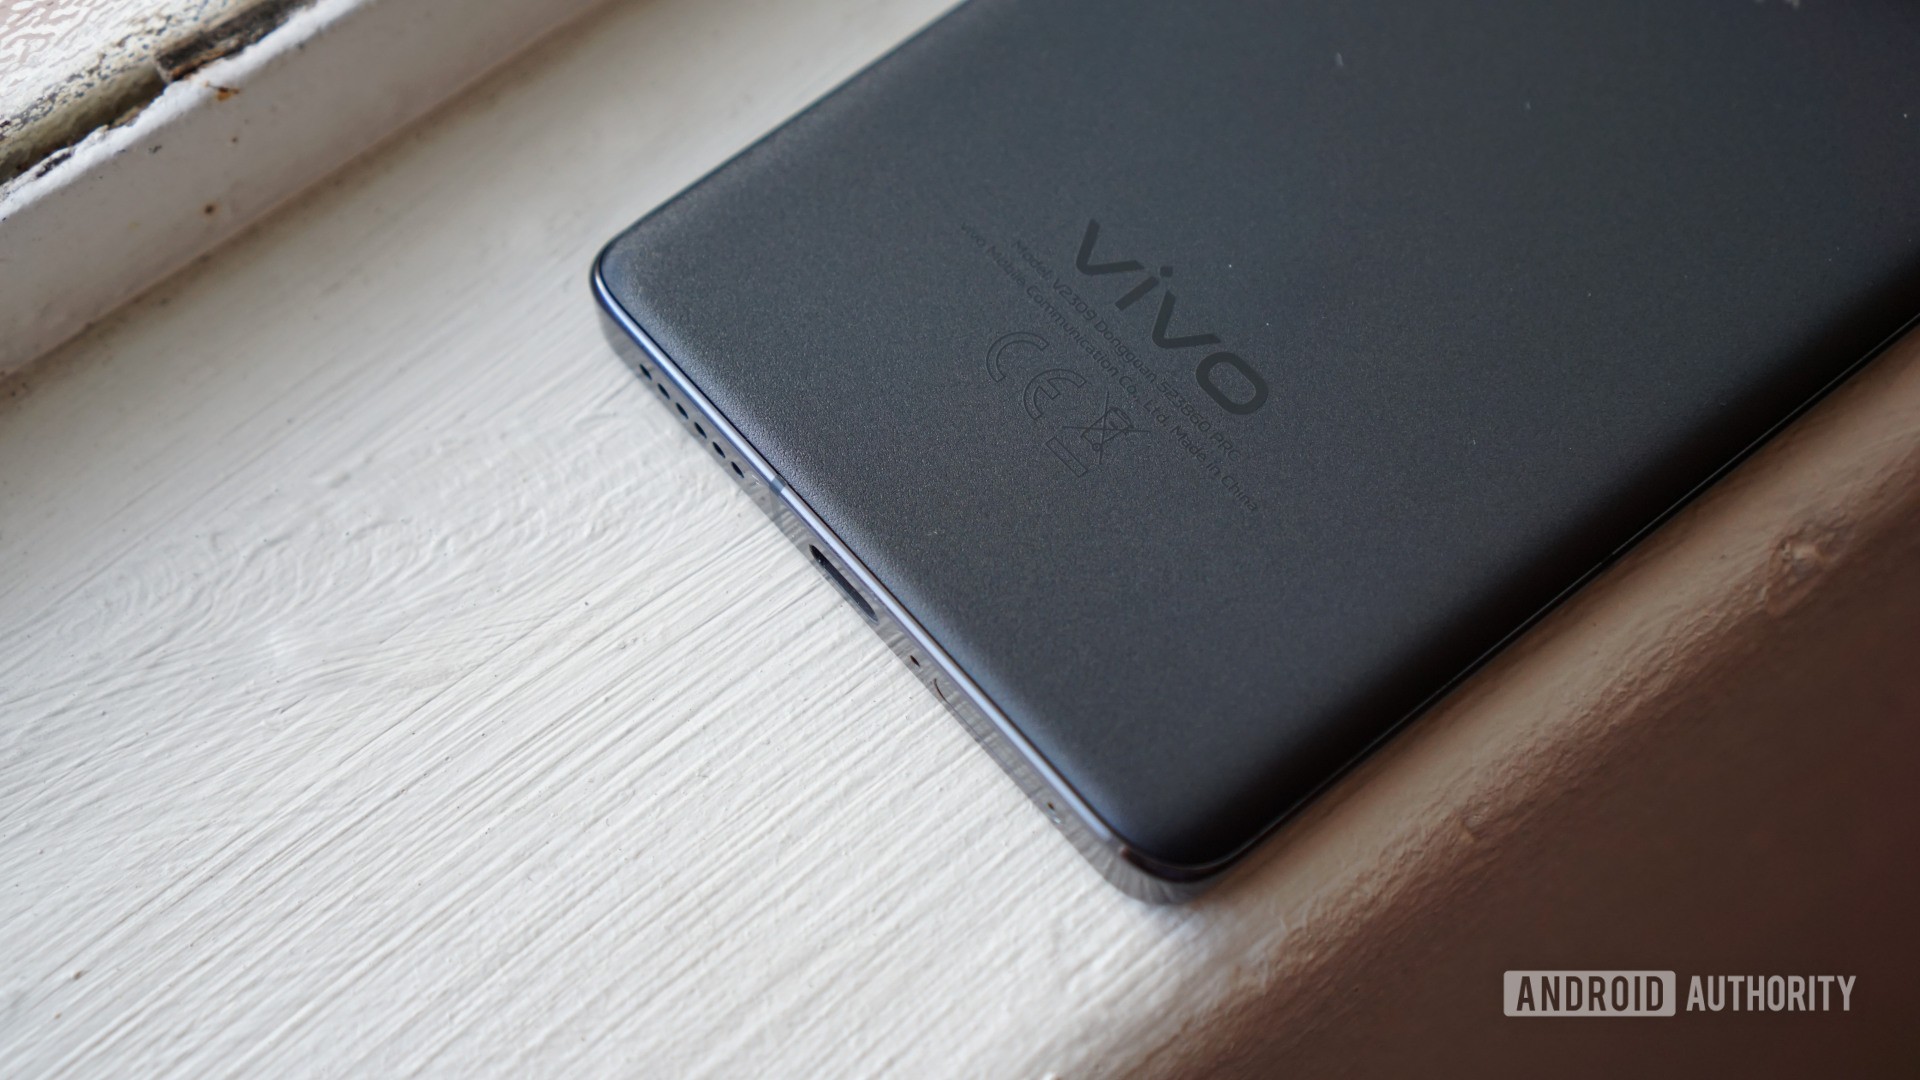 I've reviewed hundreds of phones. Vivo's X100 Pro has the best camera zoom  yet